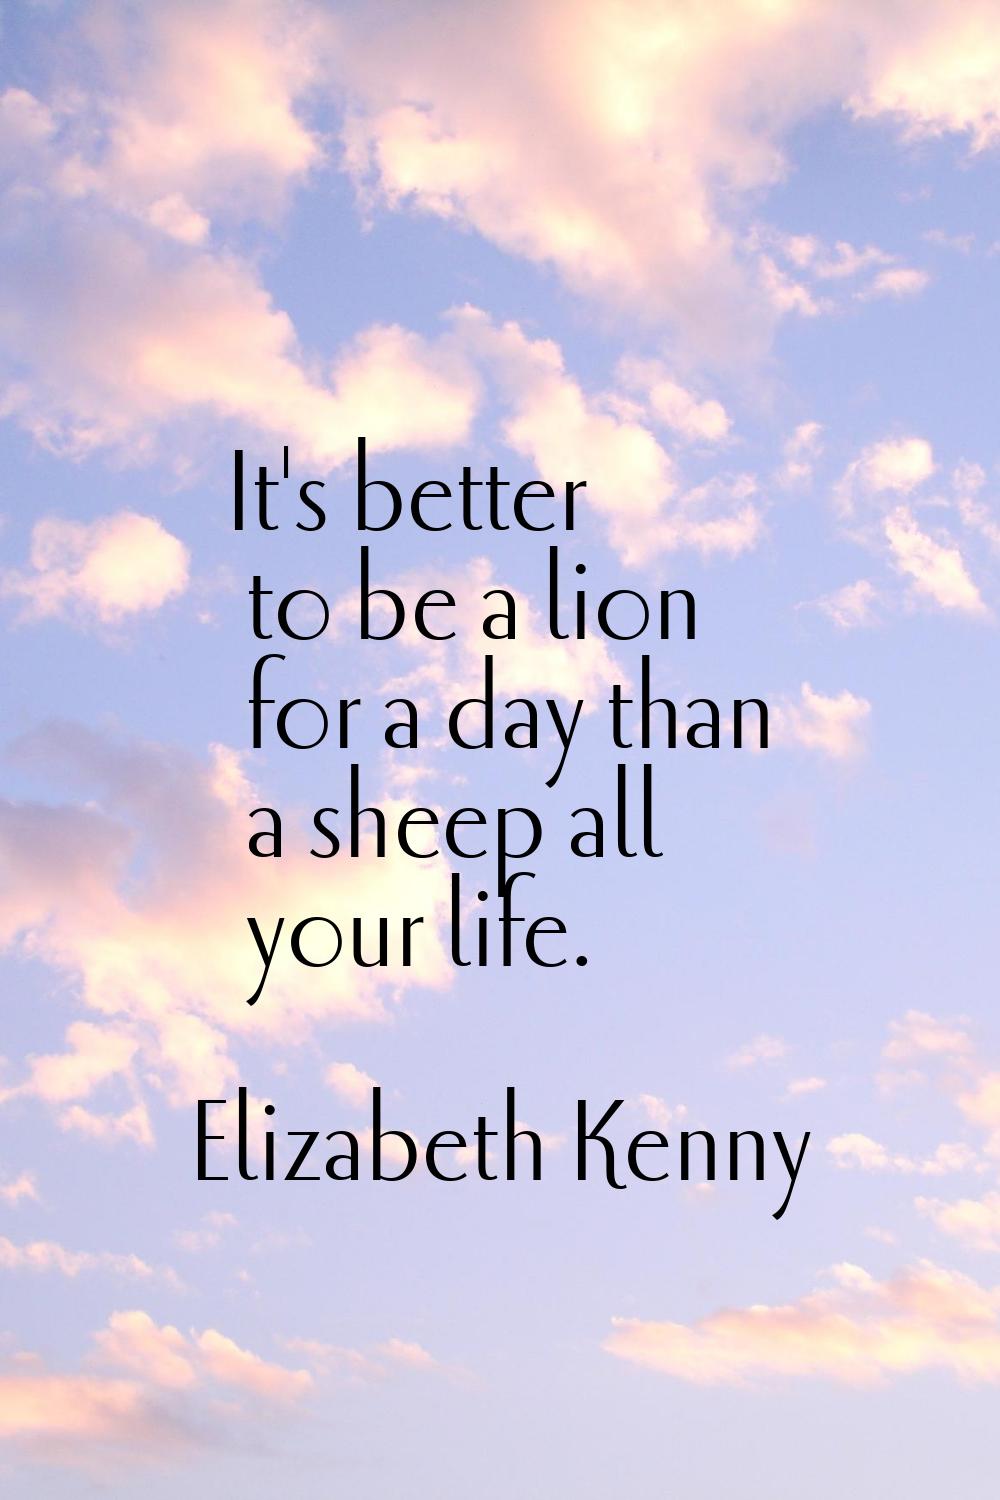 It's better to be a lion for a day than a sheep all your life.